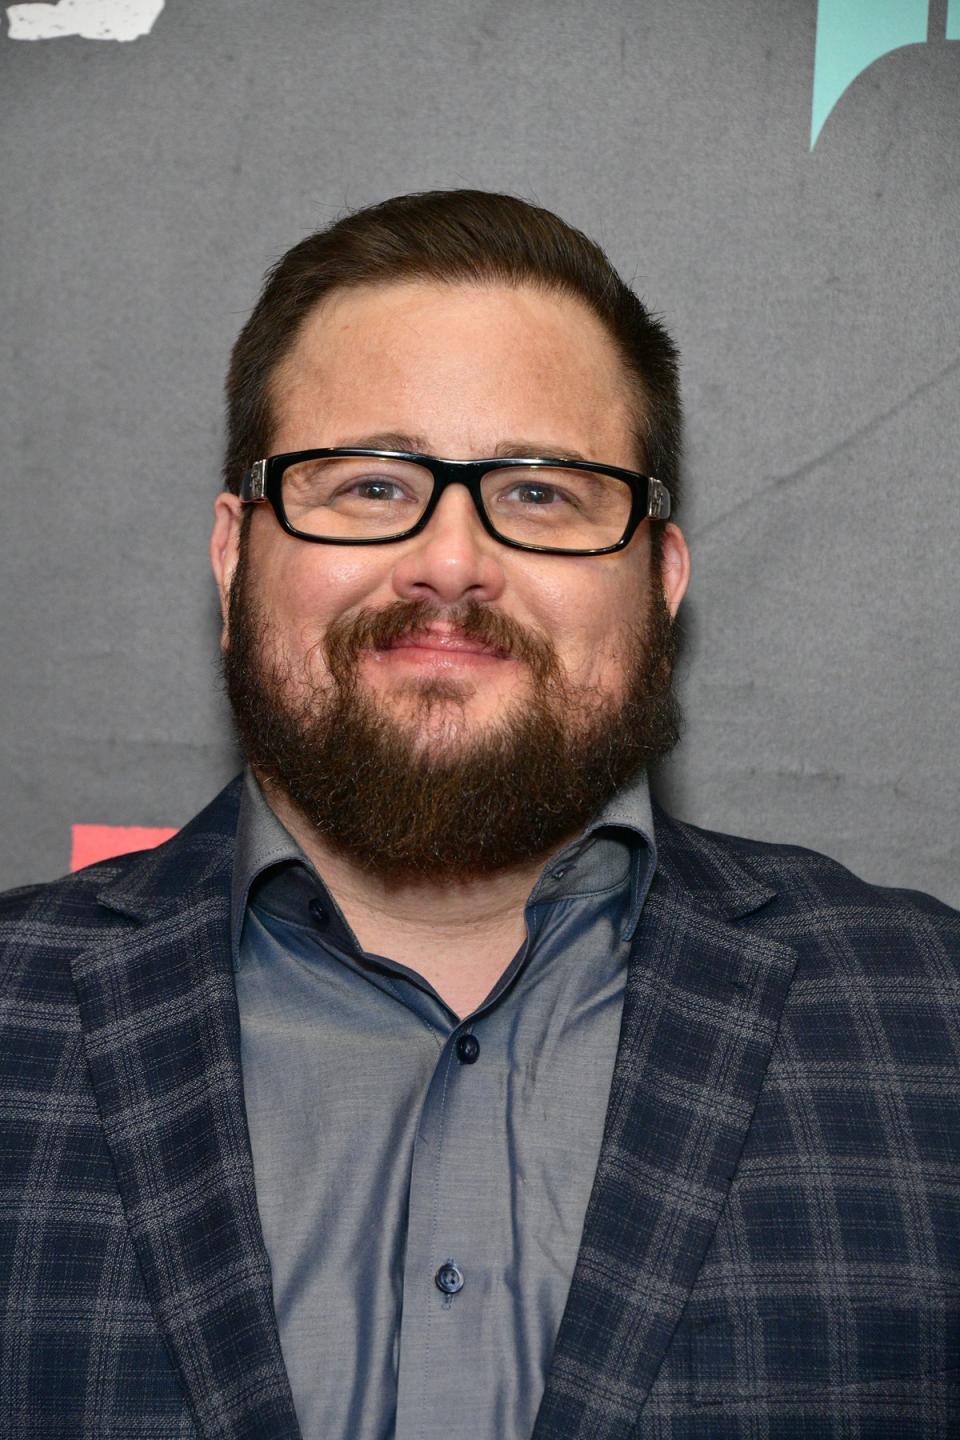 Chaz Bono came out as transgender in 2009 (Getty Images)